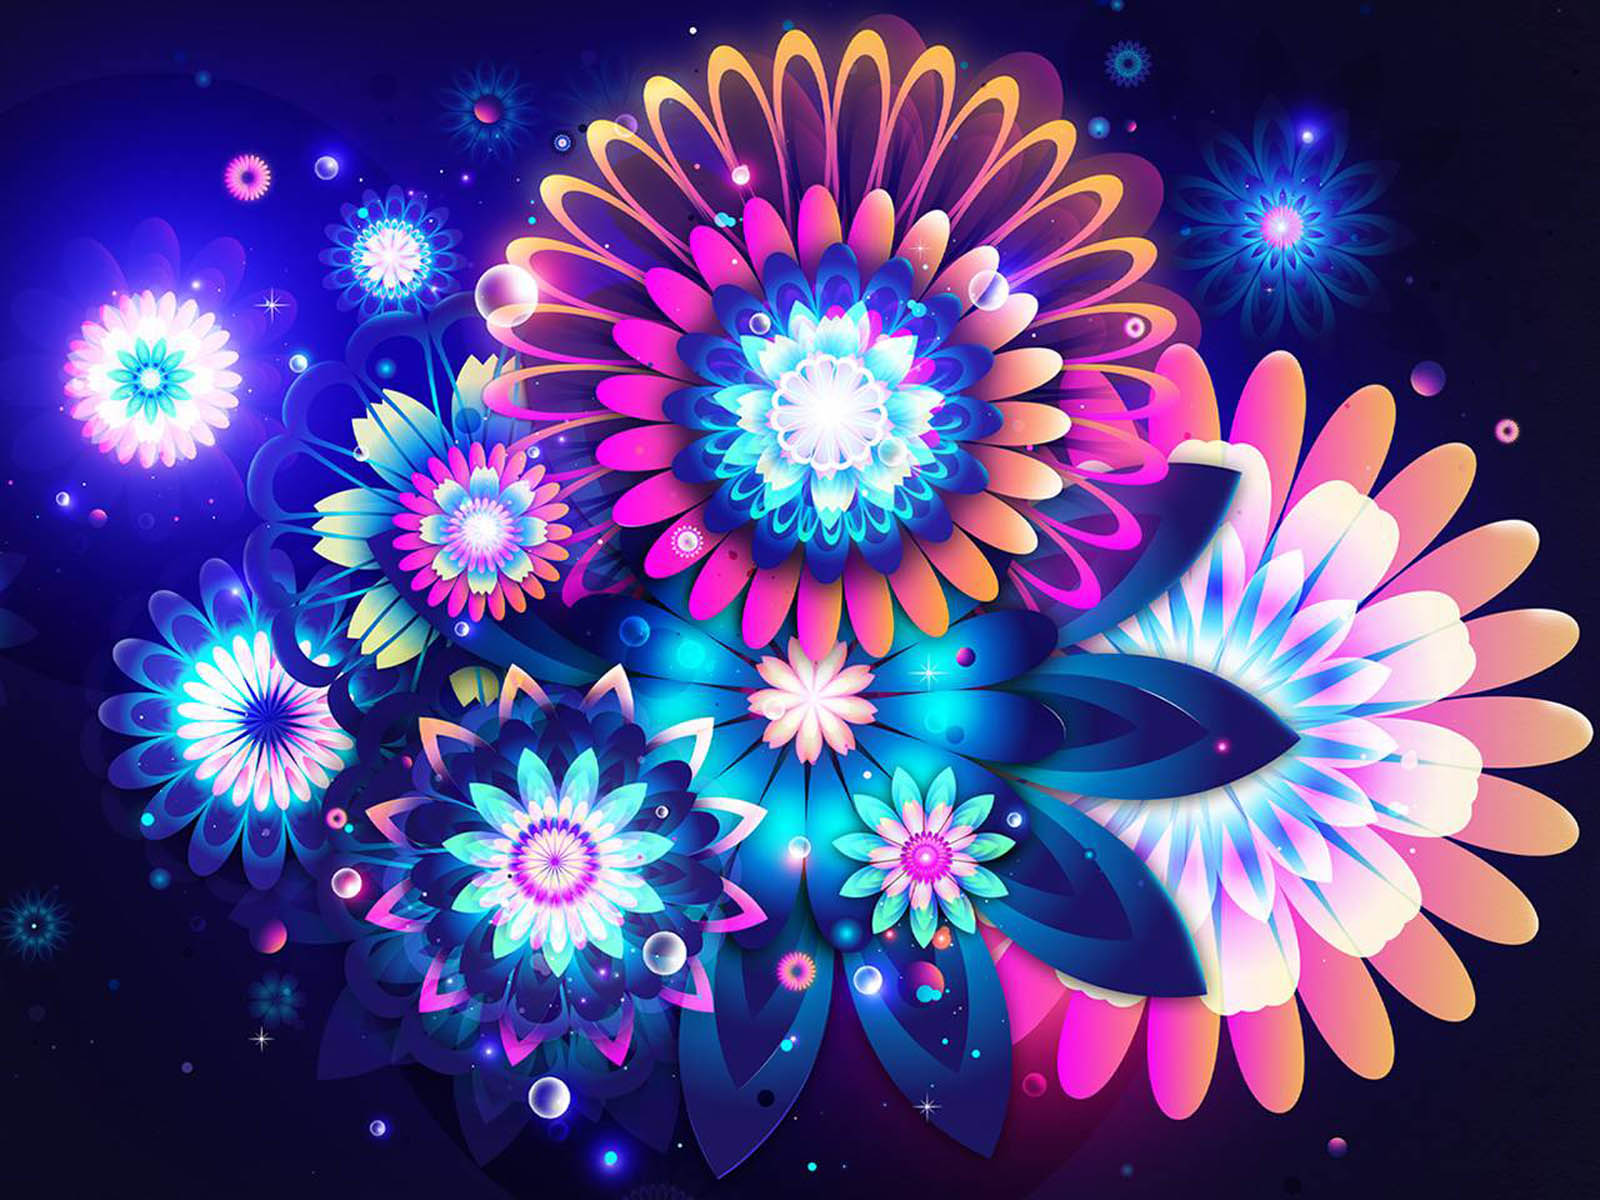 Flowers Art Wallpaper Here You Can See Abstract Digital